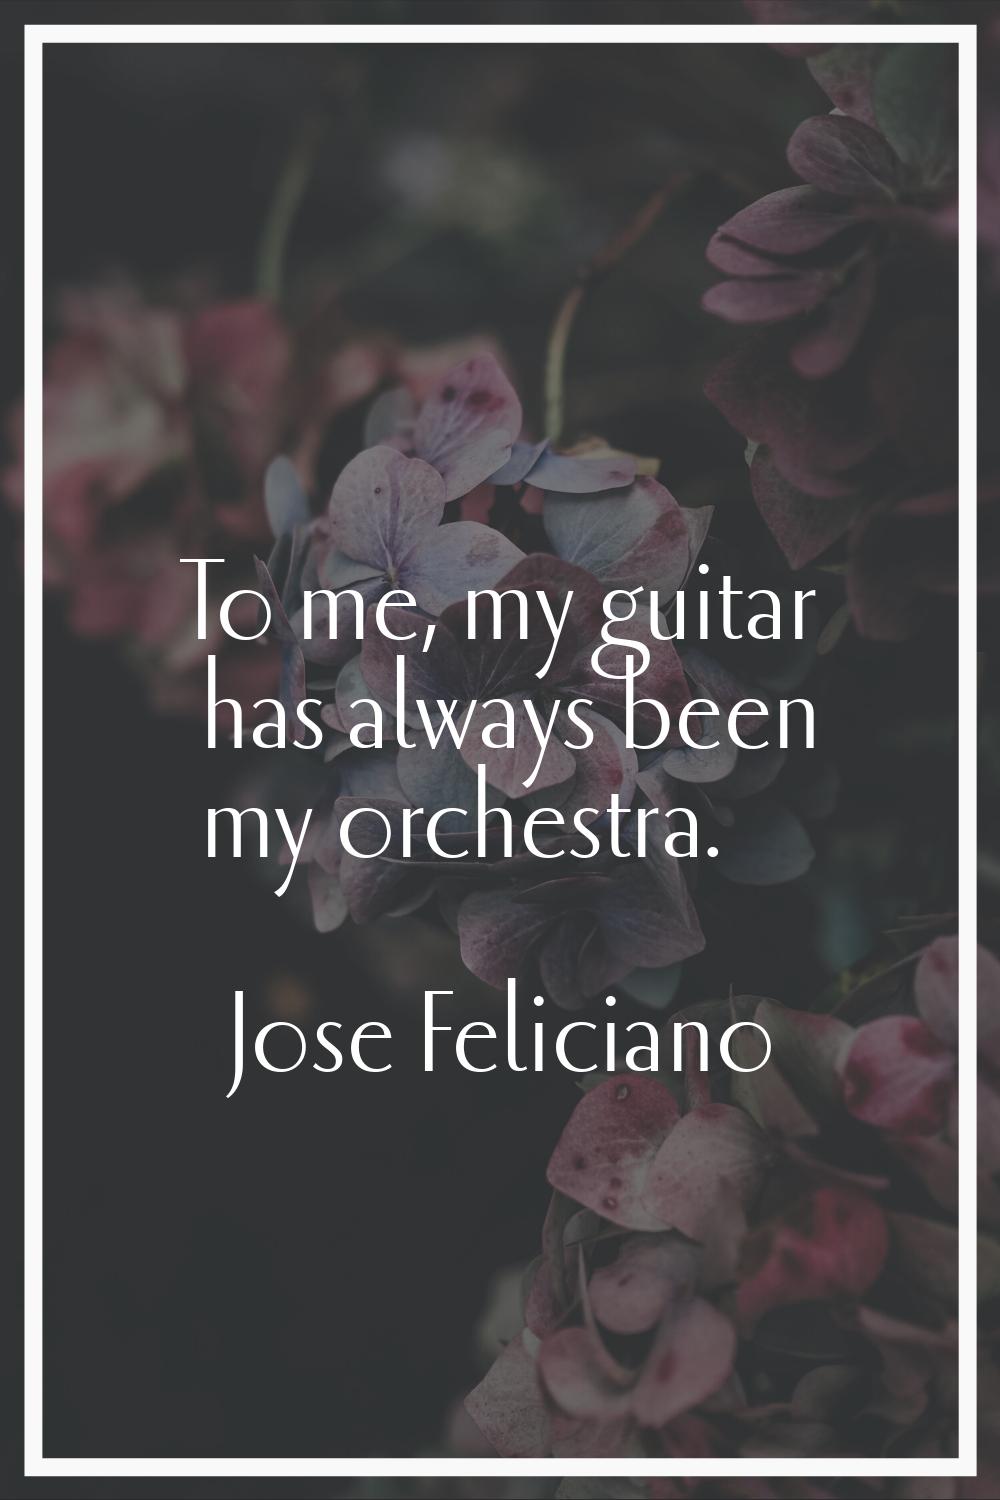 To me, my guitar has always been my orchestra.